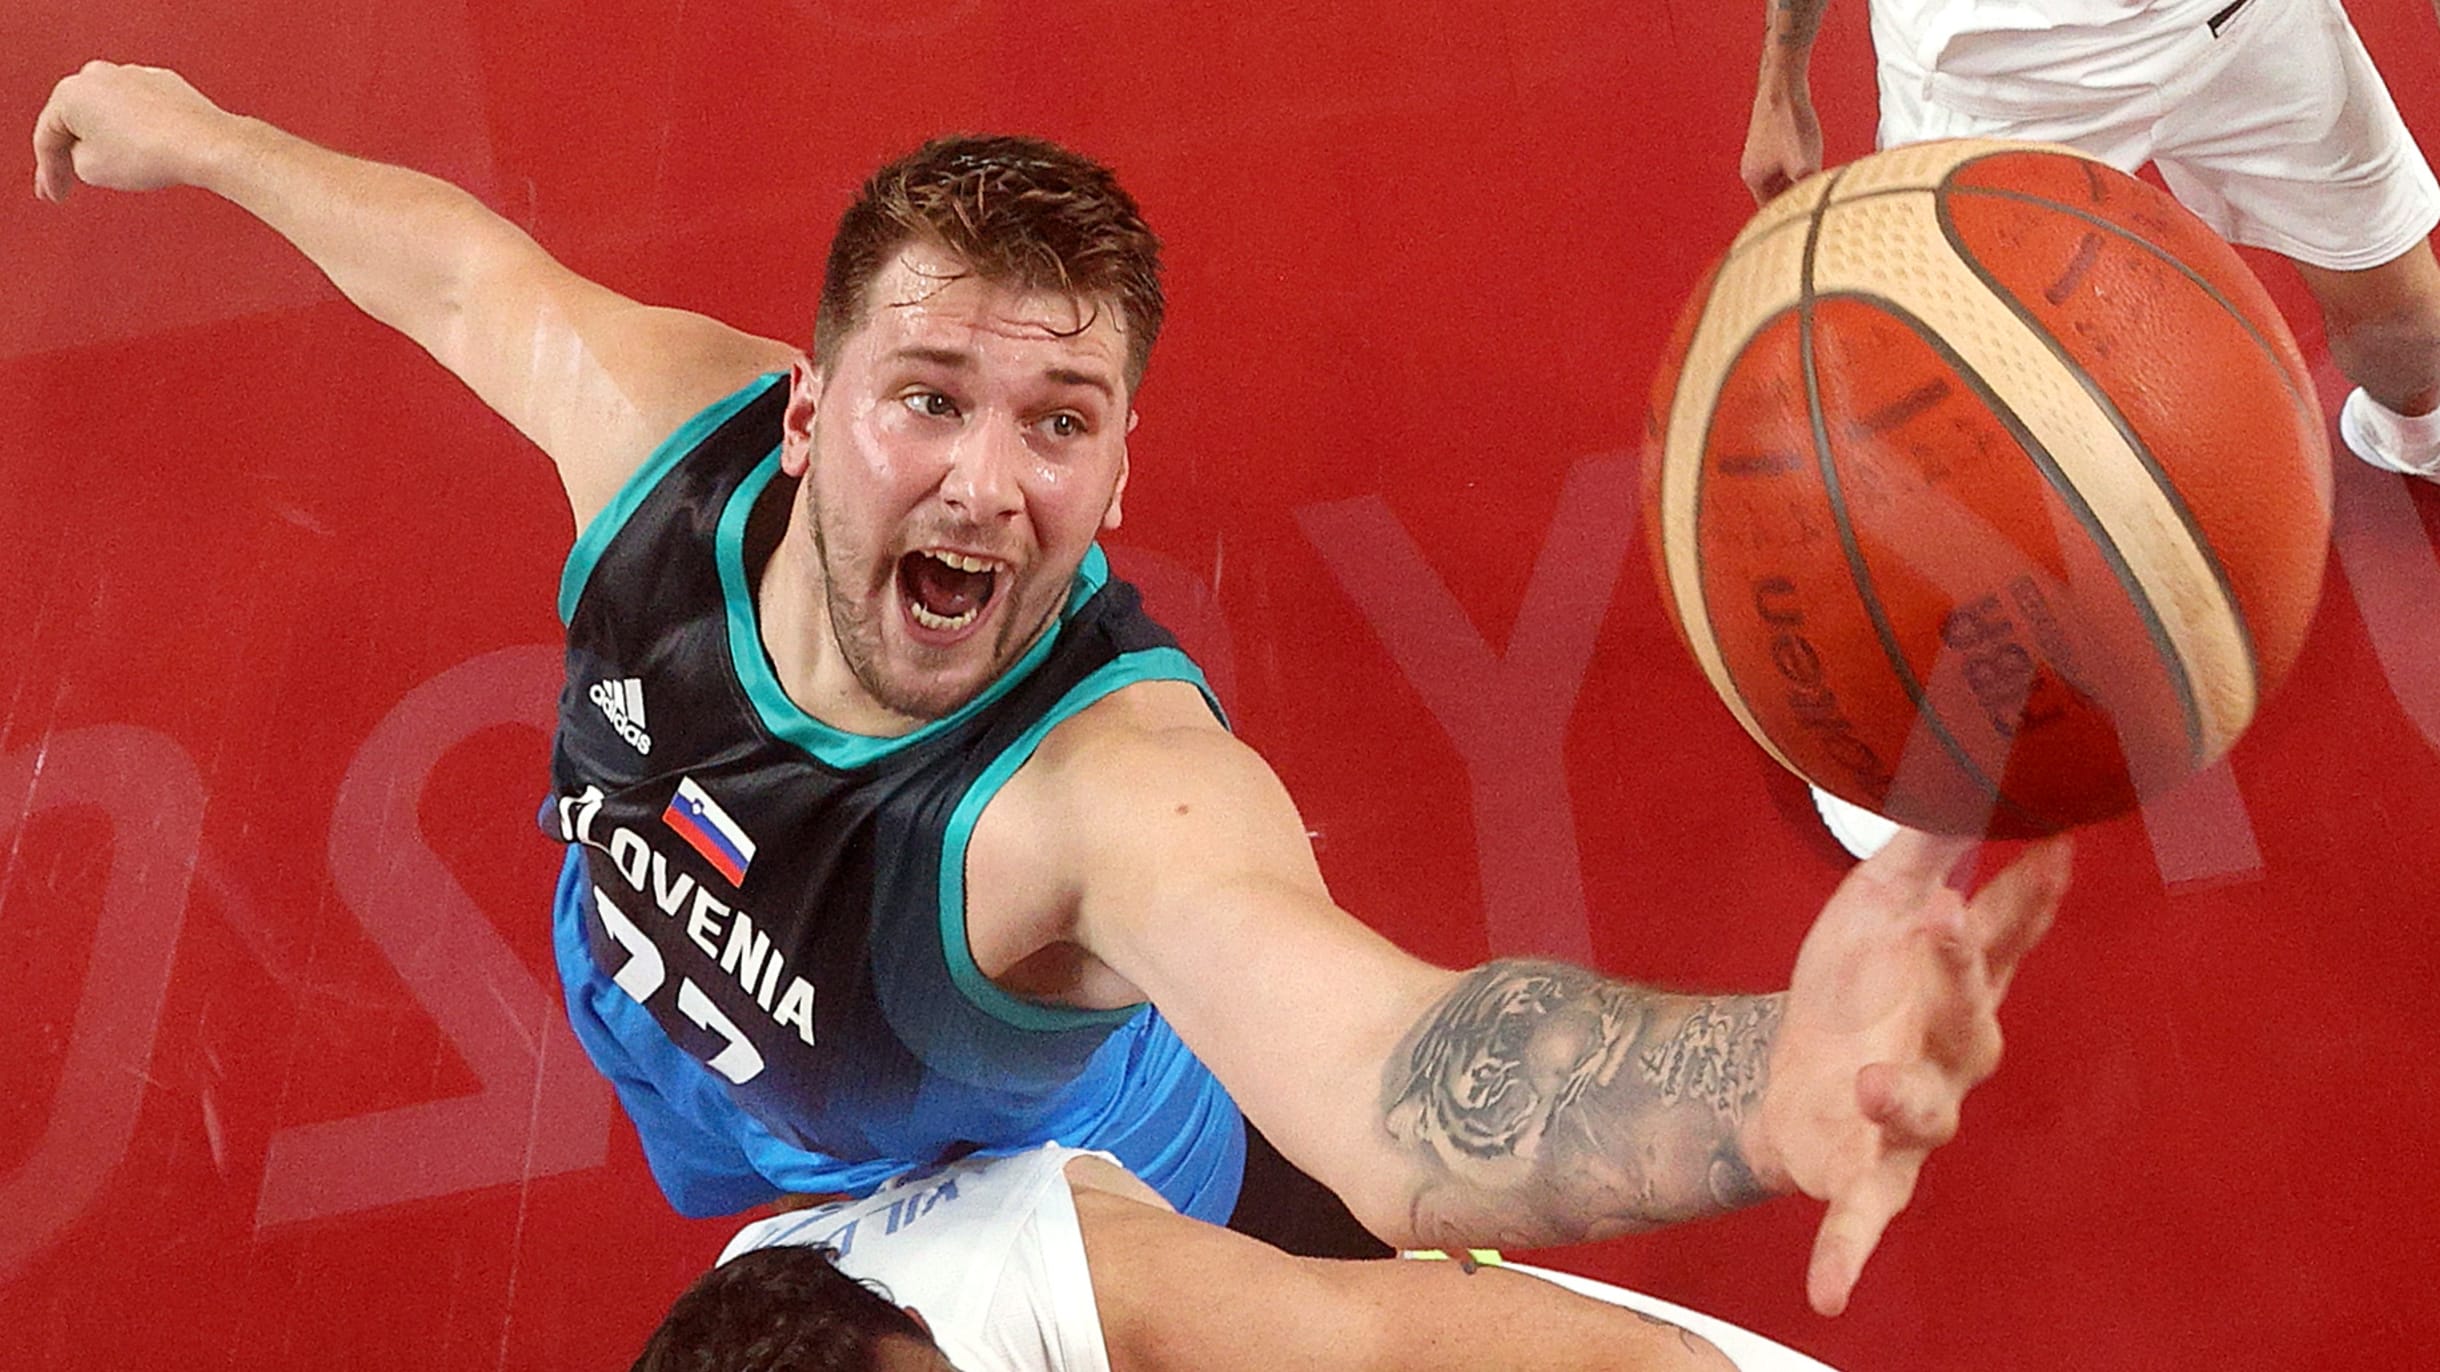 Luka Doncic leads Slovenia to its first ever Olympics: Tokyo